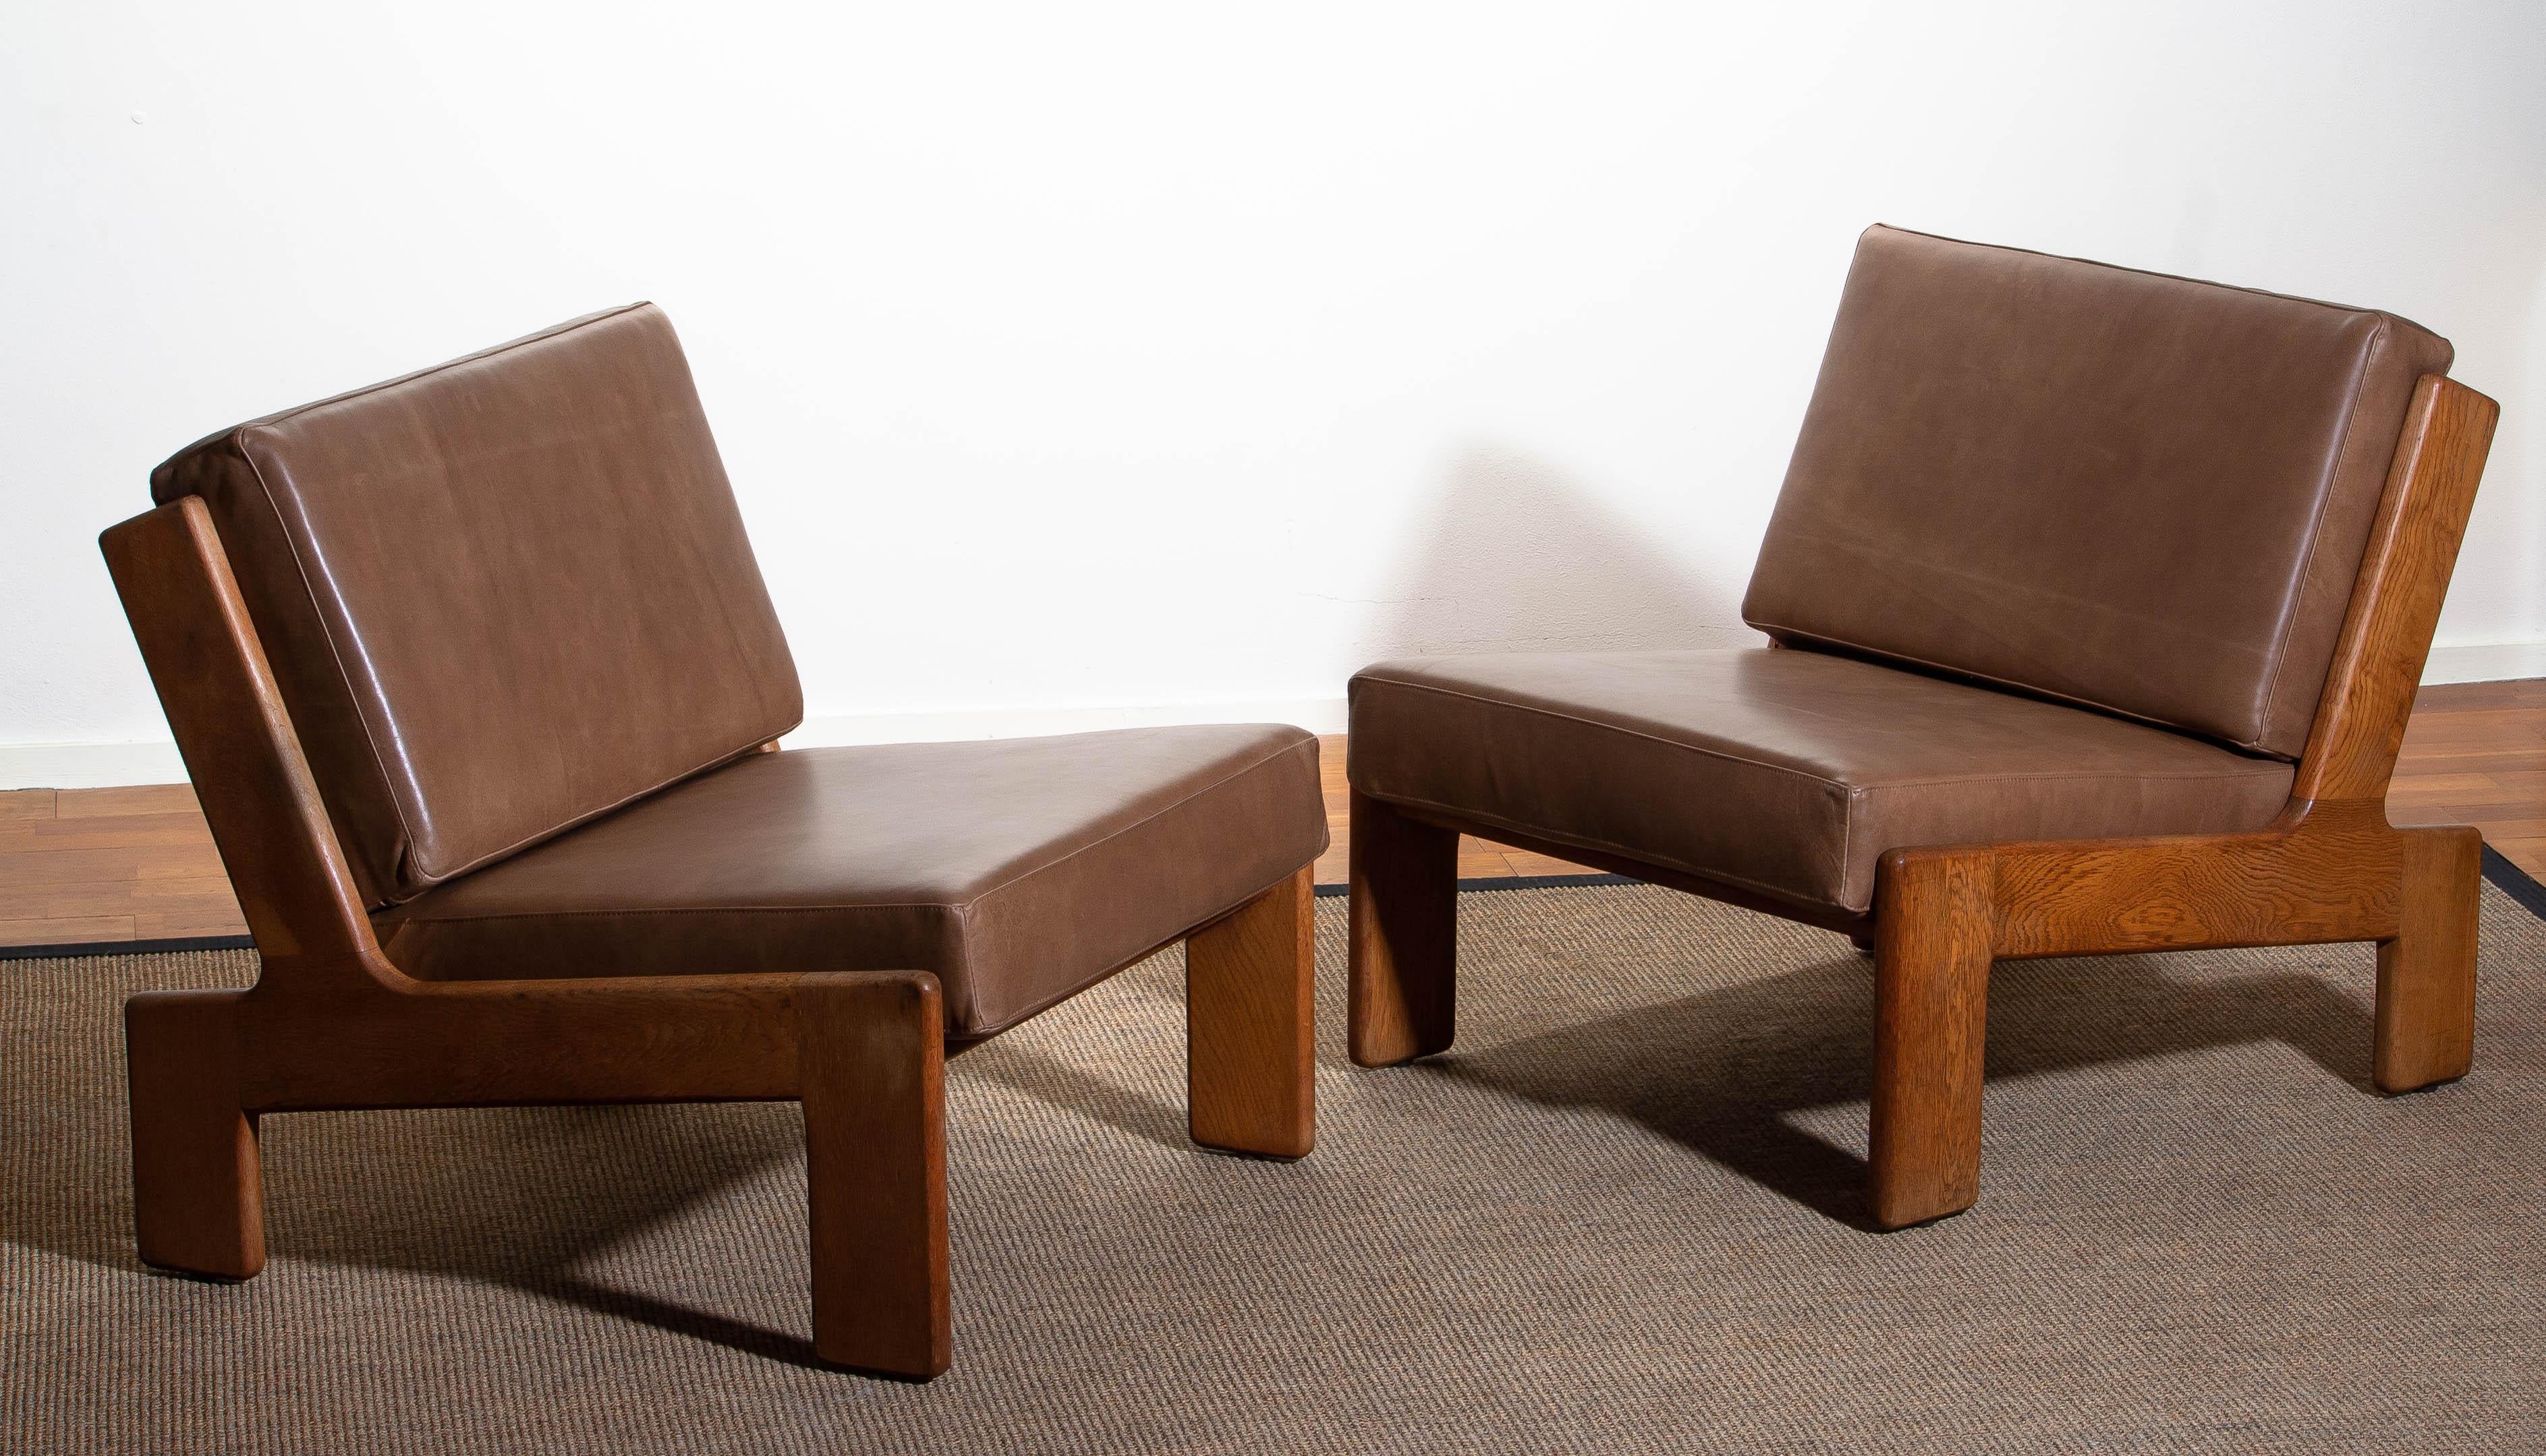 1960s. Set of two extremely rare cubist lounge /easy chairs designed by Esko Pajamies for Asko Finland in oak and leather.
The cushions of both chairs are newly upholstered with leather. Also the bindings are replaced.
The overall condition of